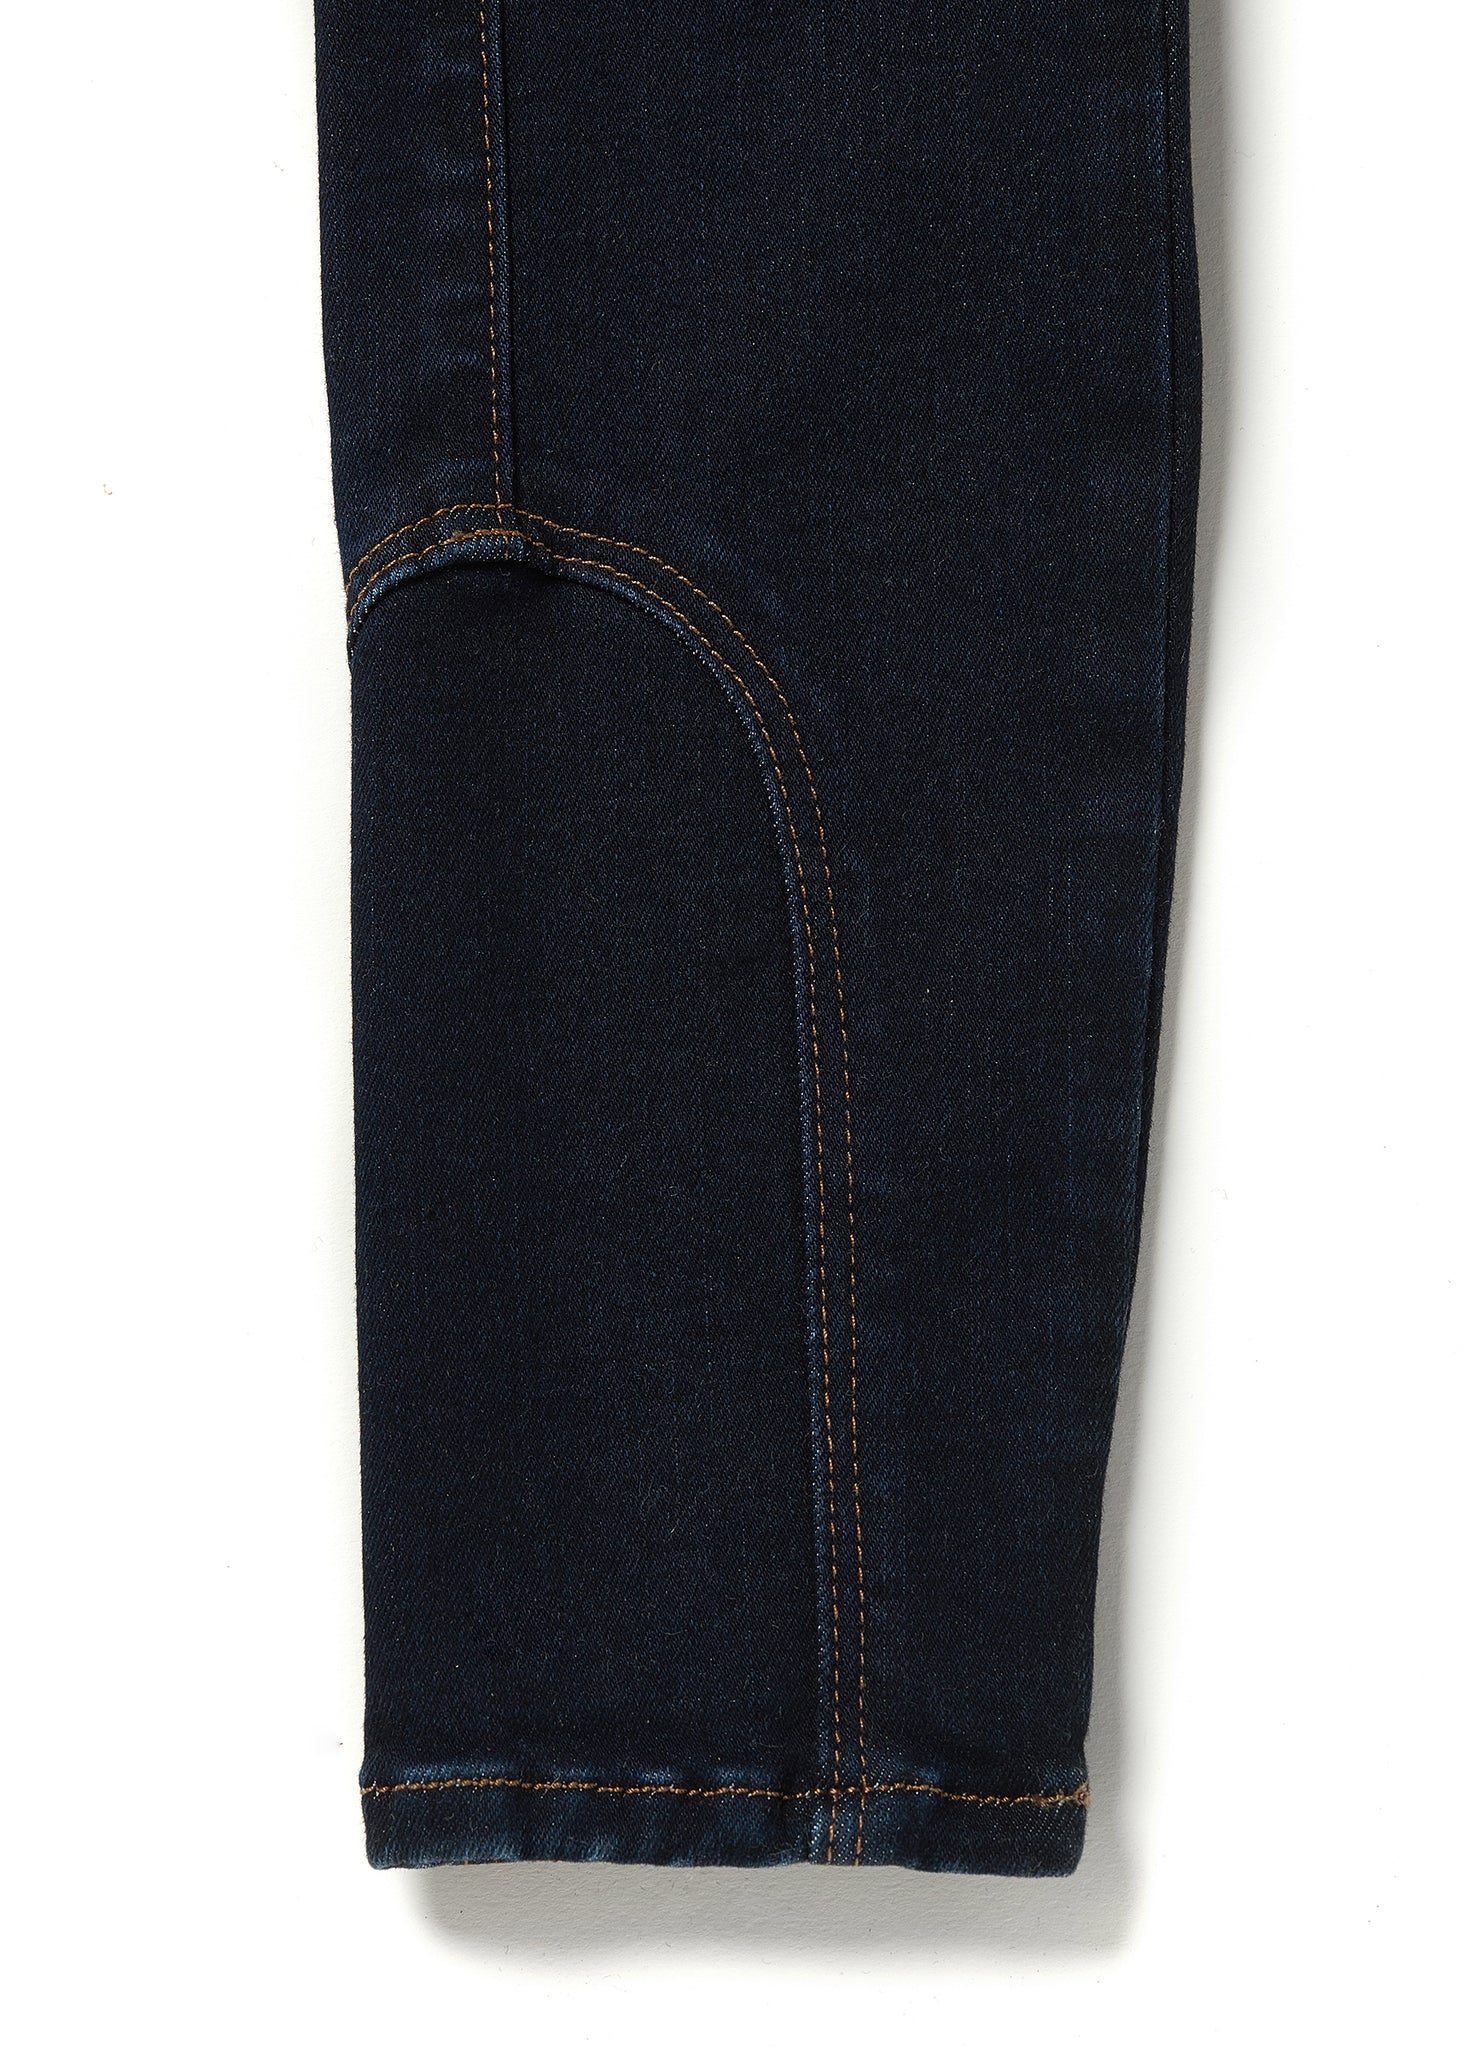 jodhpur style seams on womens high rise dark blue denim skinny stretch thermal jean with two open pockets to the front and back with internal fleece lining and gold hc crest on front right pocket